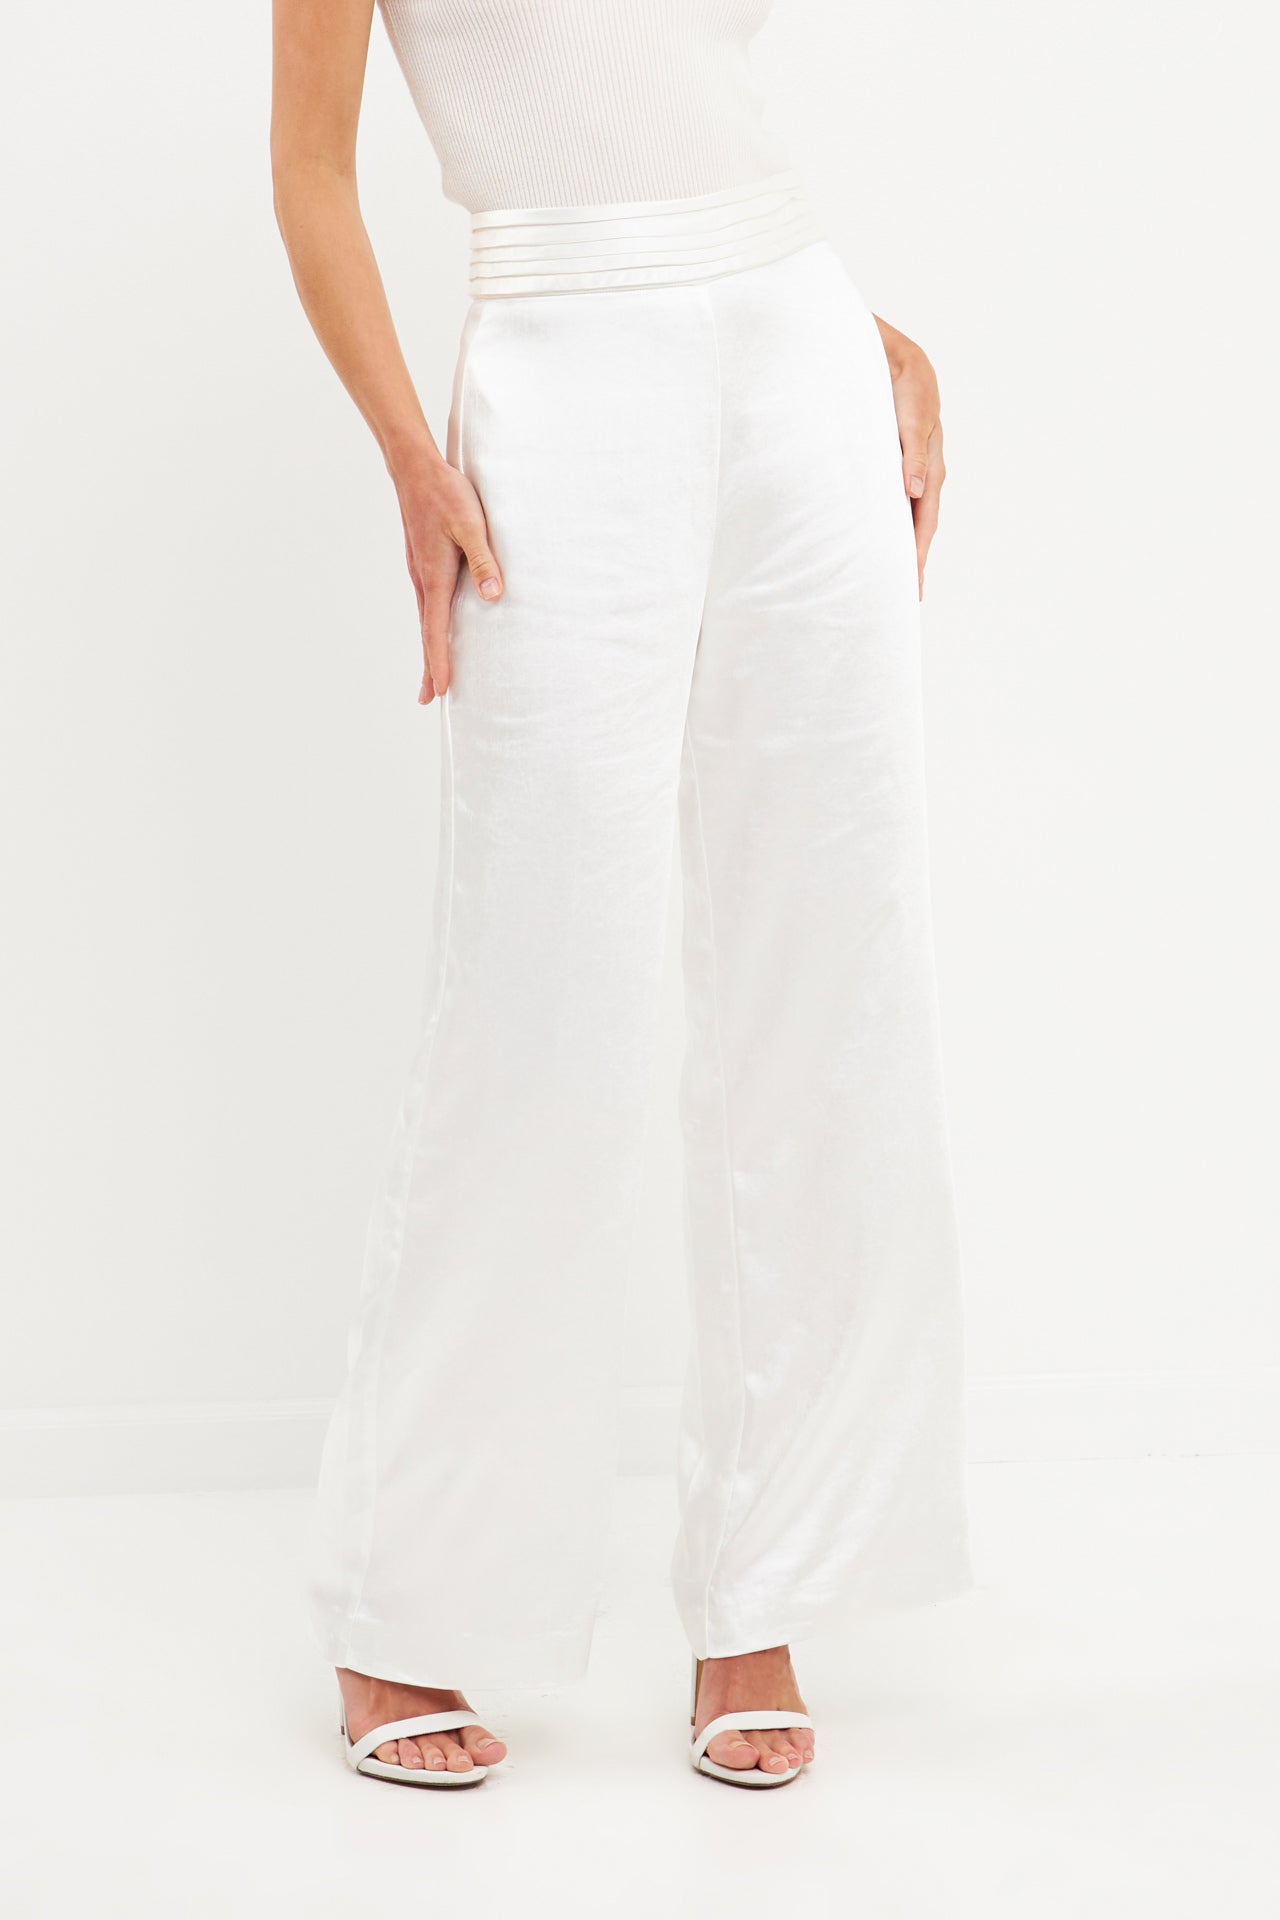 Endless Rose - Satin Tuxedo Wide Leg Trousers - Pants in Women's Clothing available at endlessrose.com